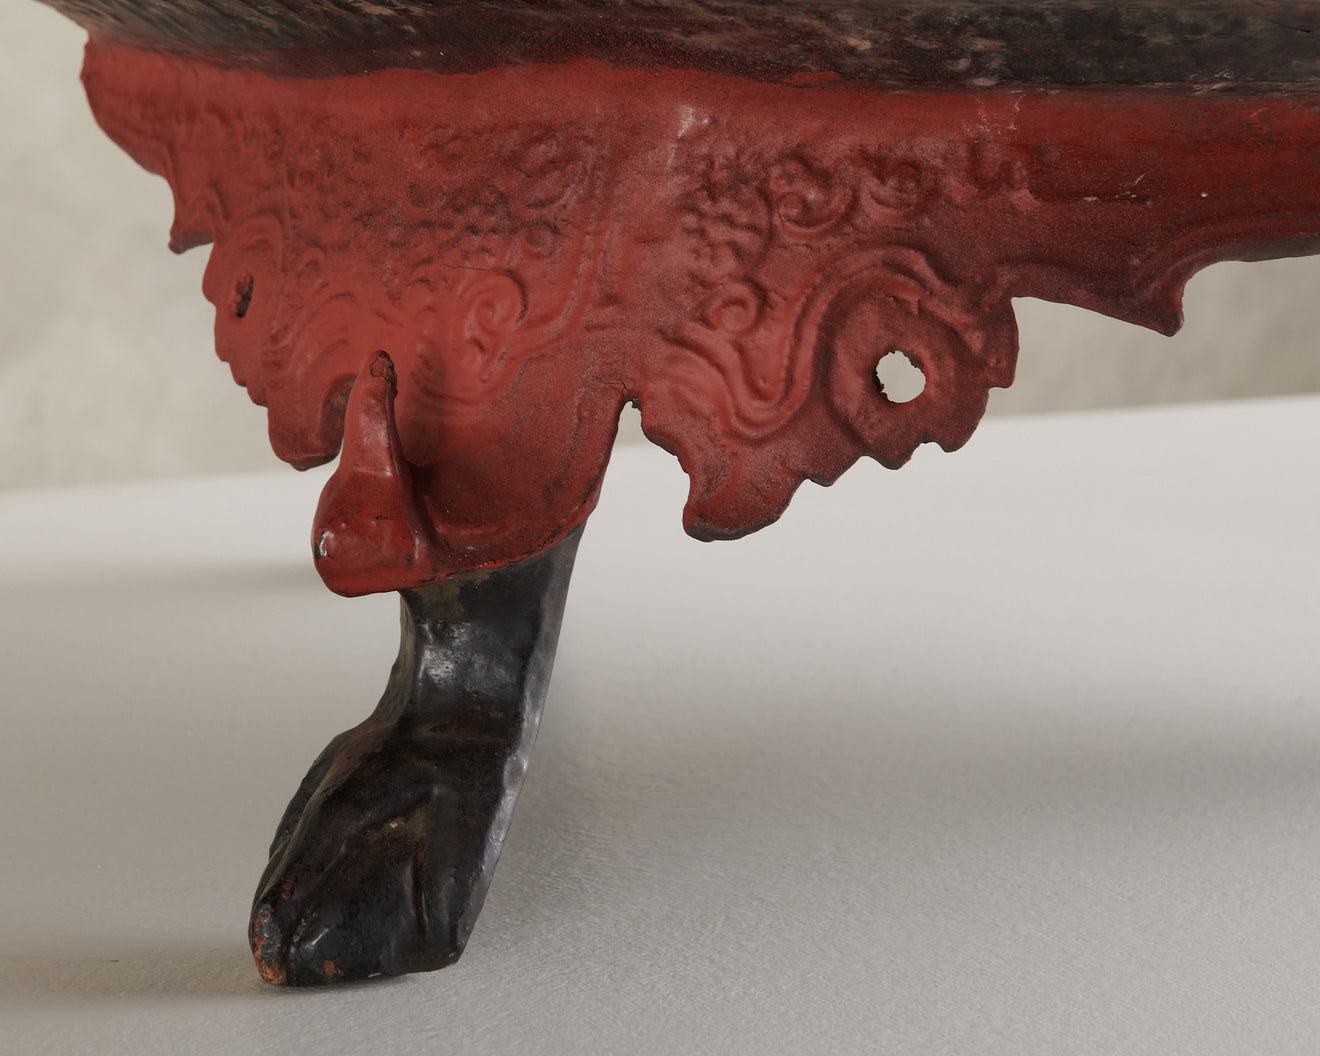 BURMESE LACQUERWARE PLATTER WITH CLAW FEET